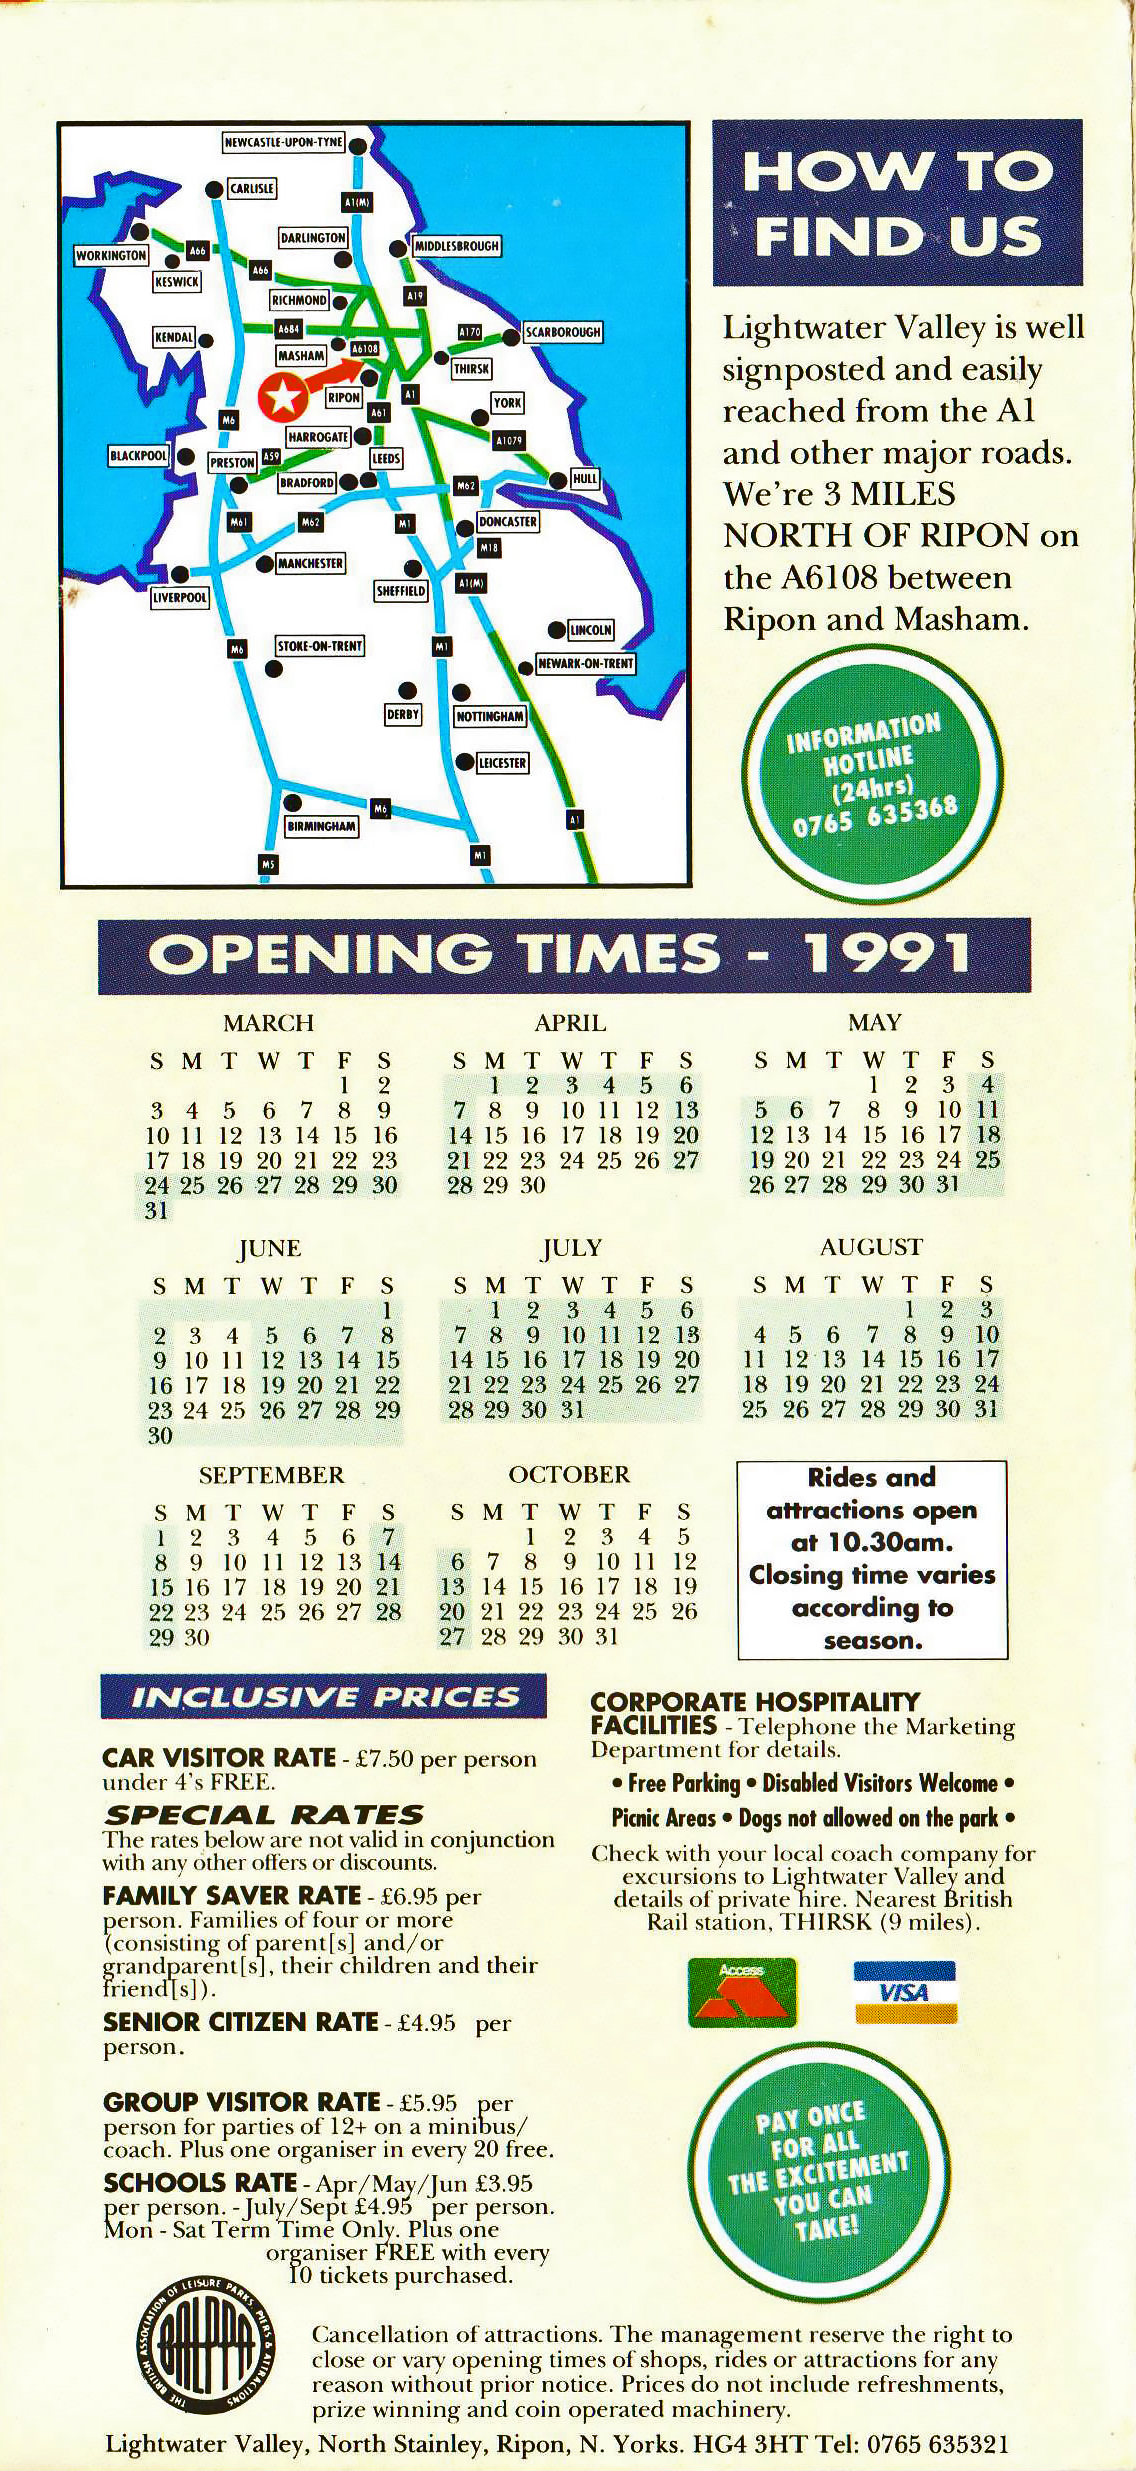 Lightwater Valley Theme Park: Vintage Flyer and Map from season 1991